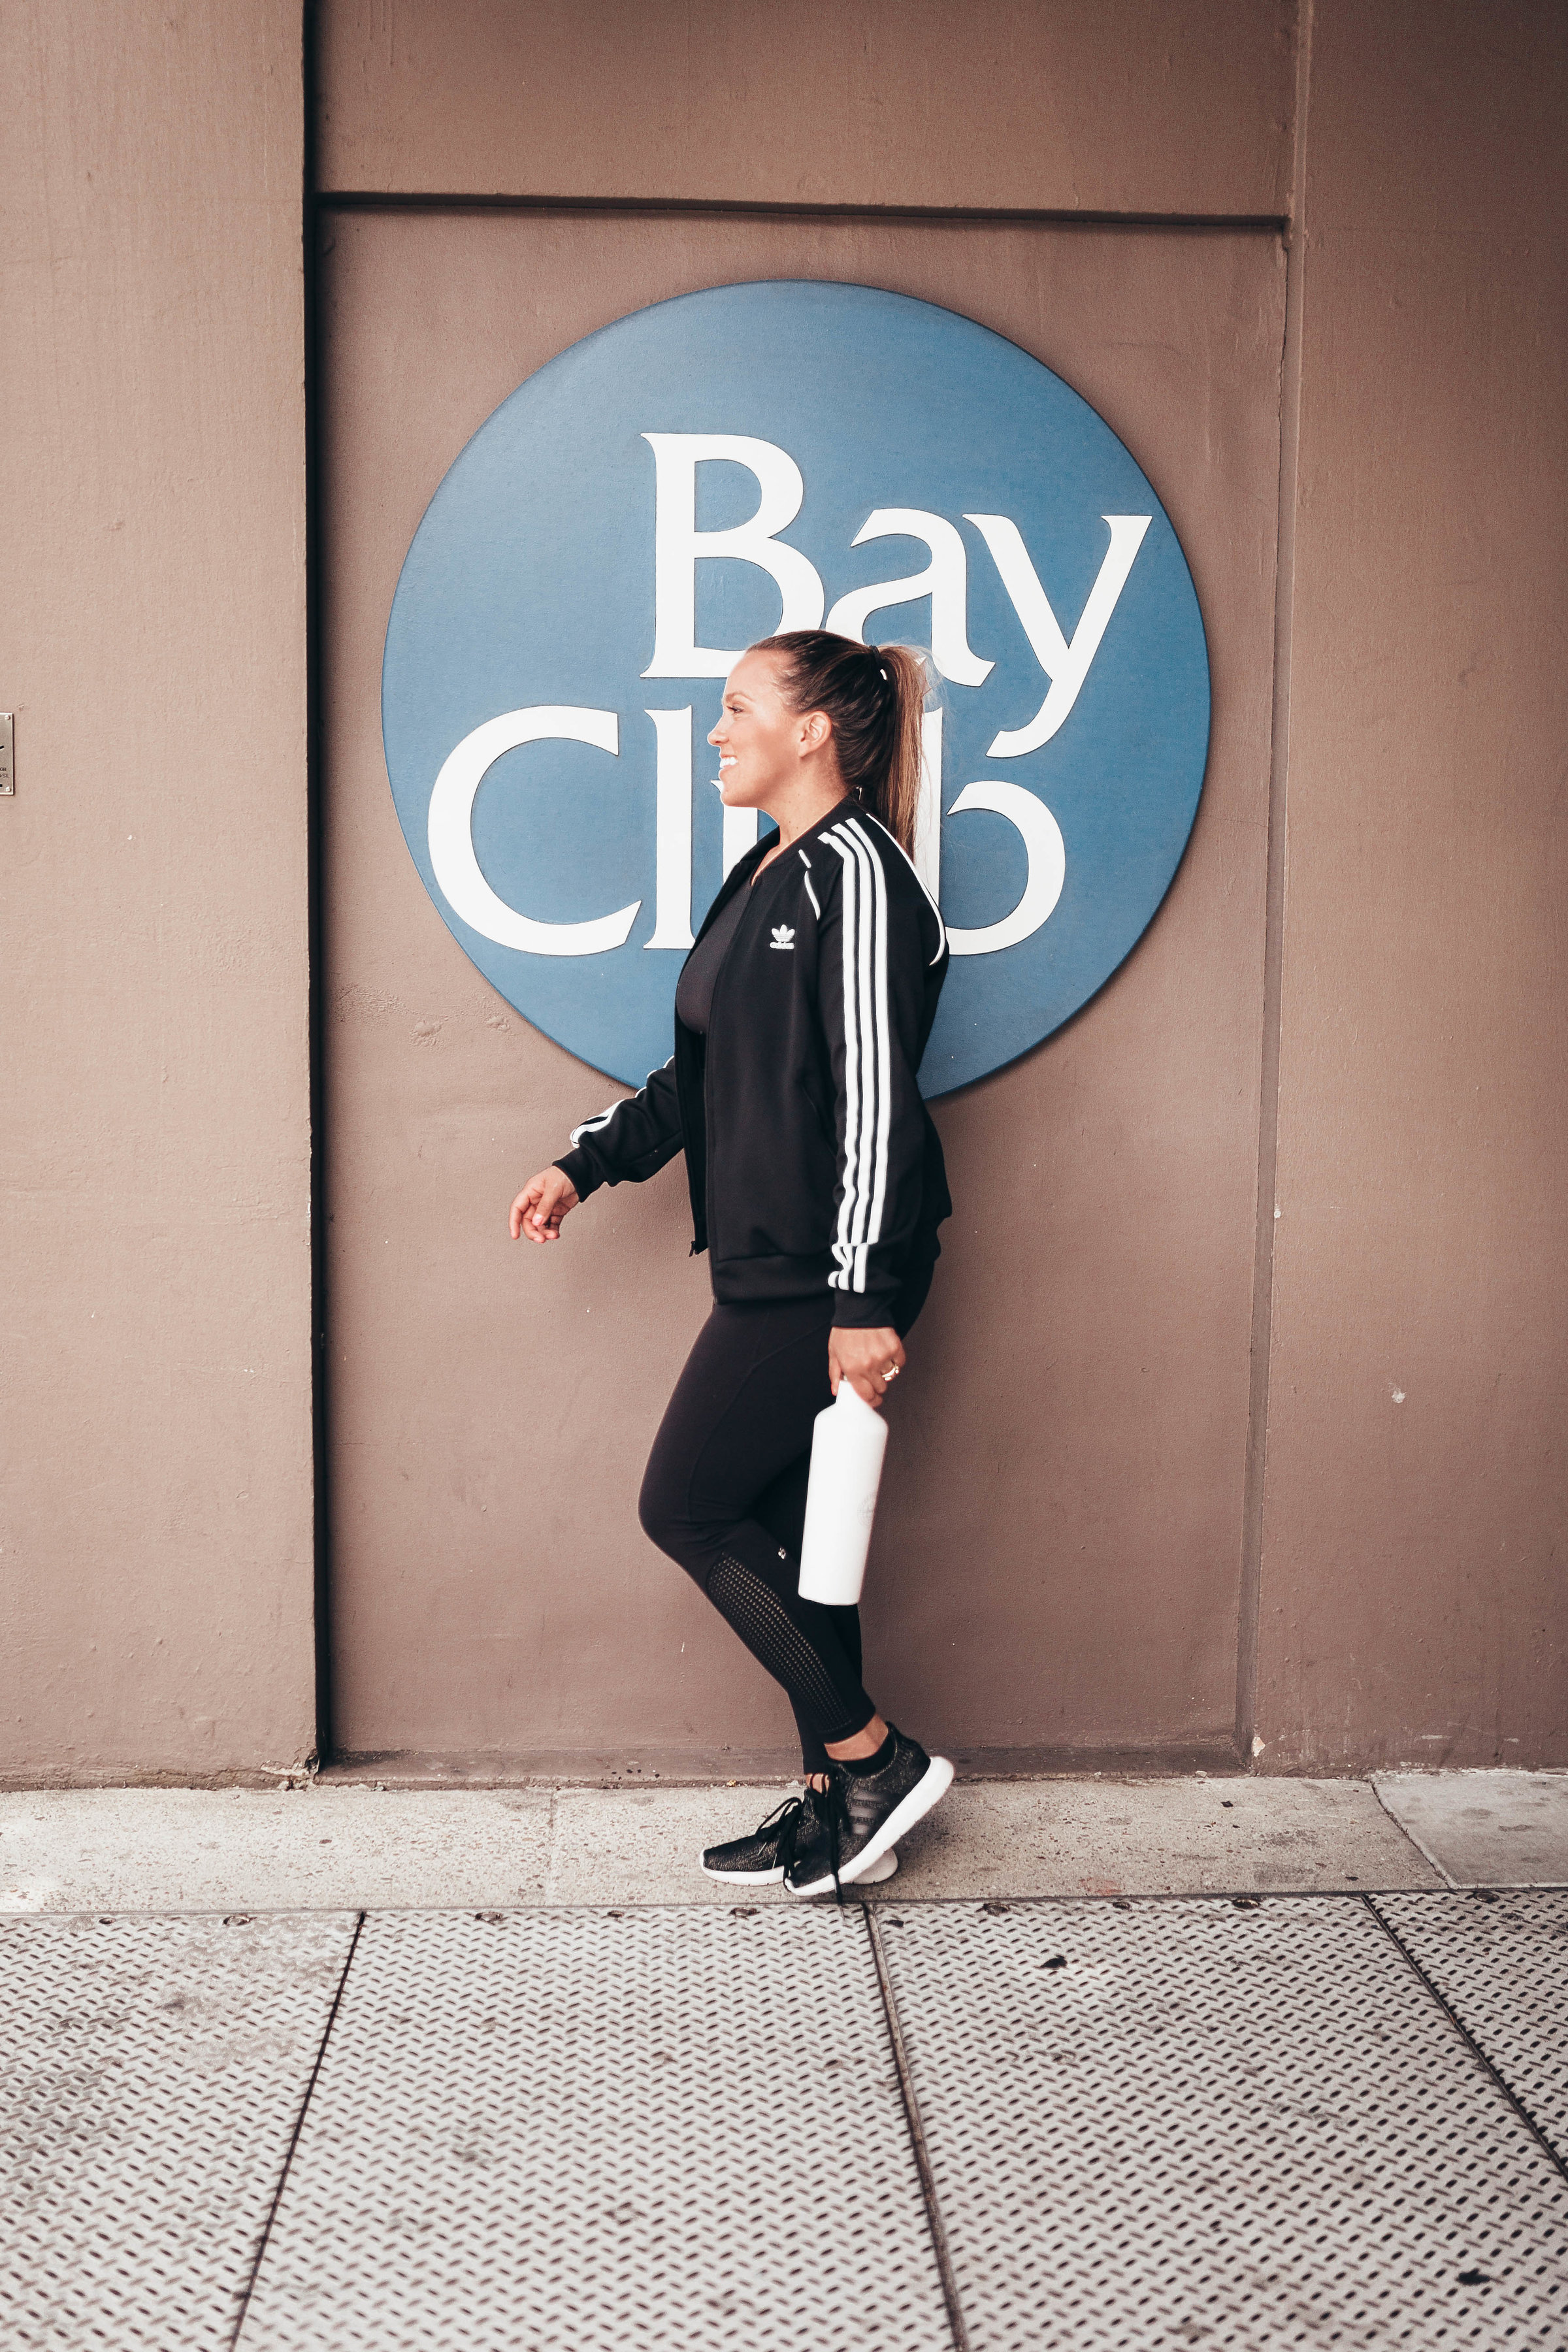 Ashley Zeal from Two Peas in a Prada shares a six month review of Bay Club San Francisco. She is wearing Splits 59 leggings and an Adidas jacket and sneakers. 